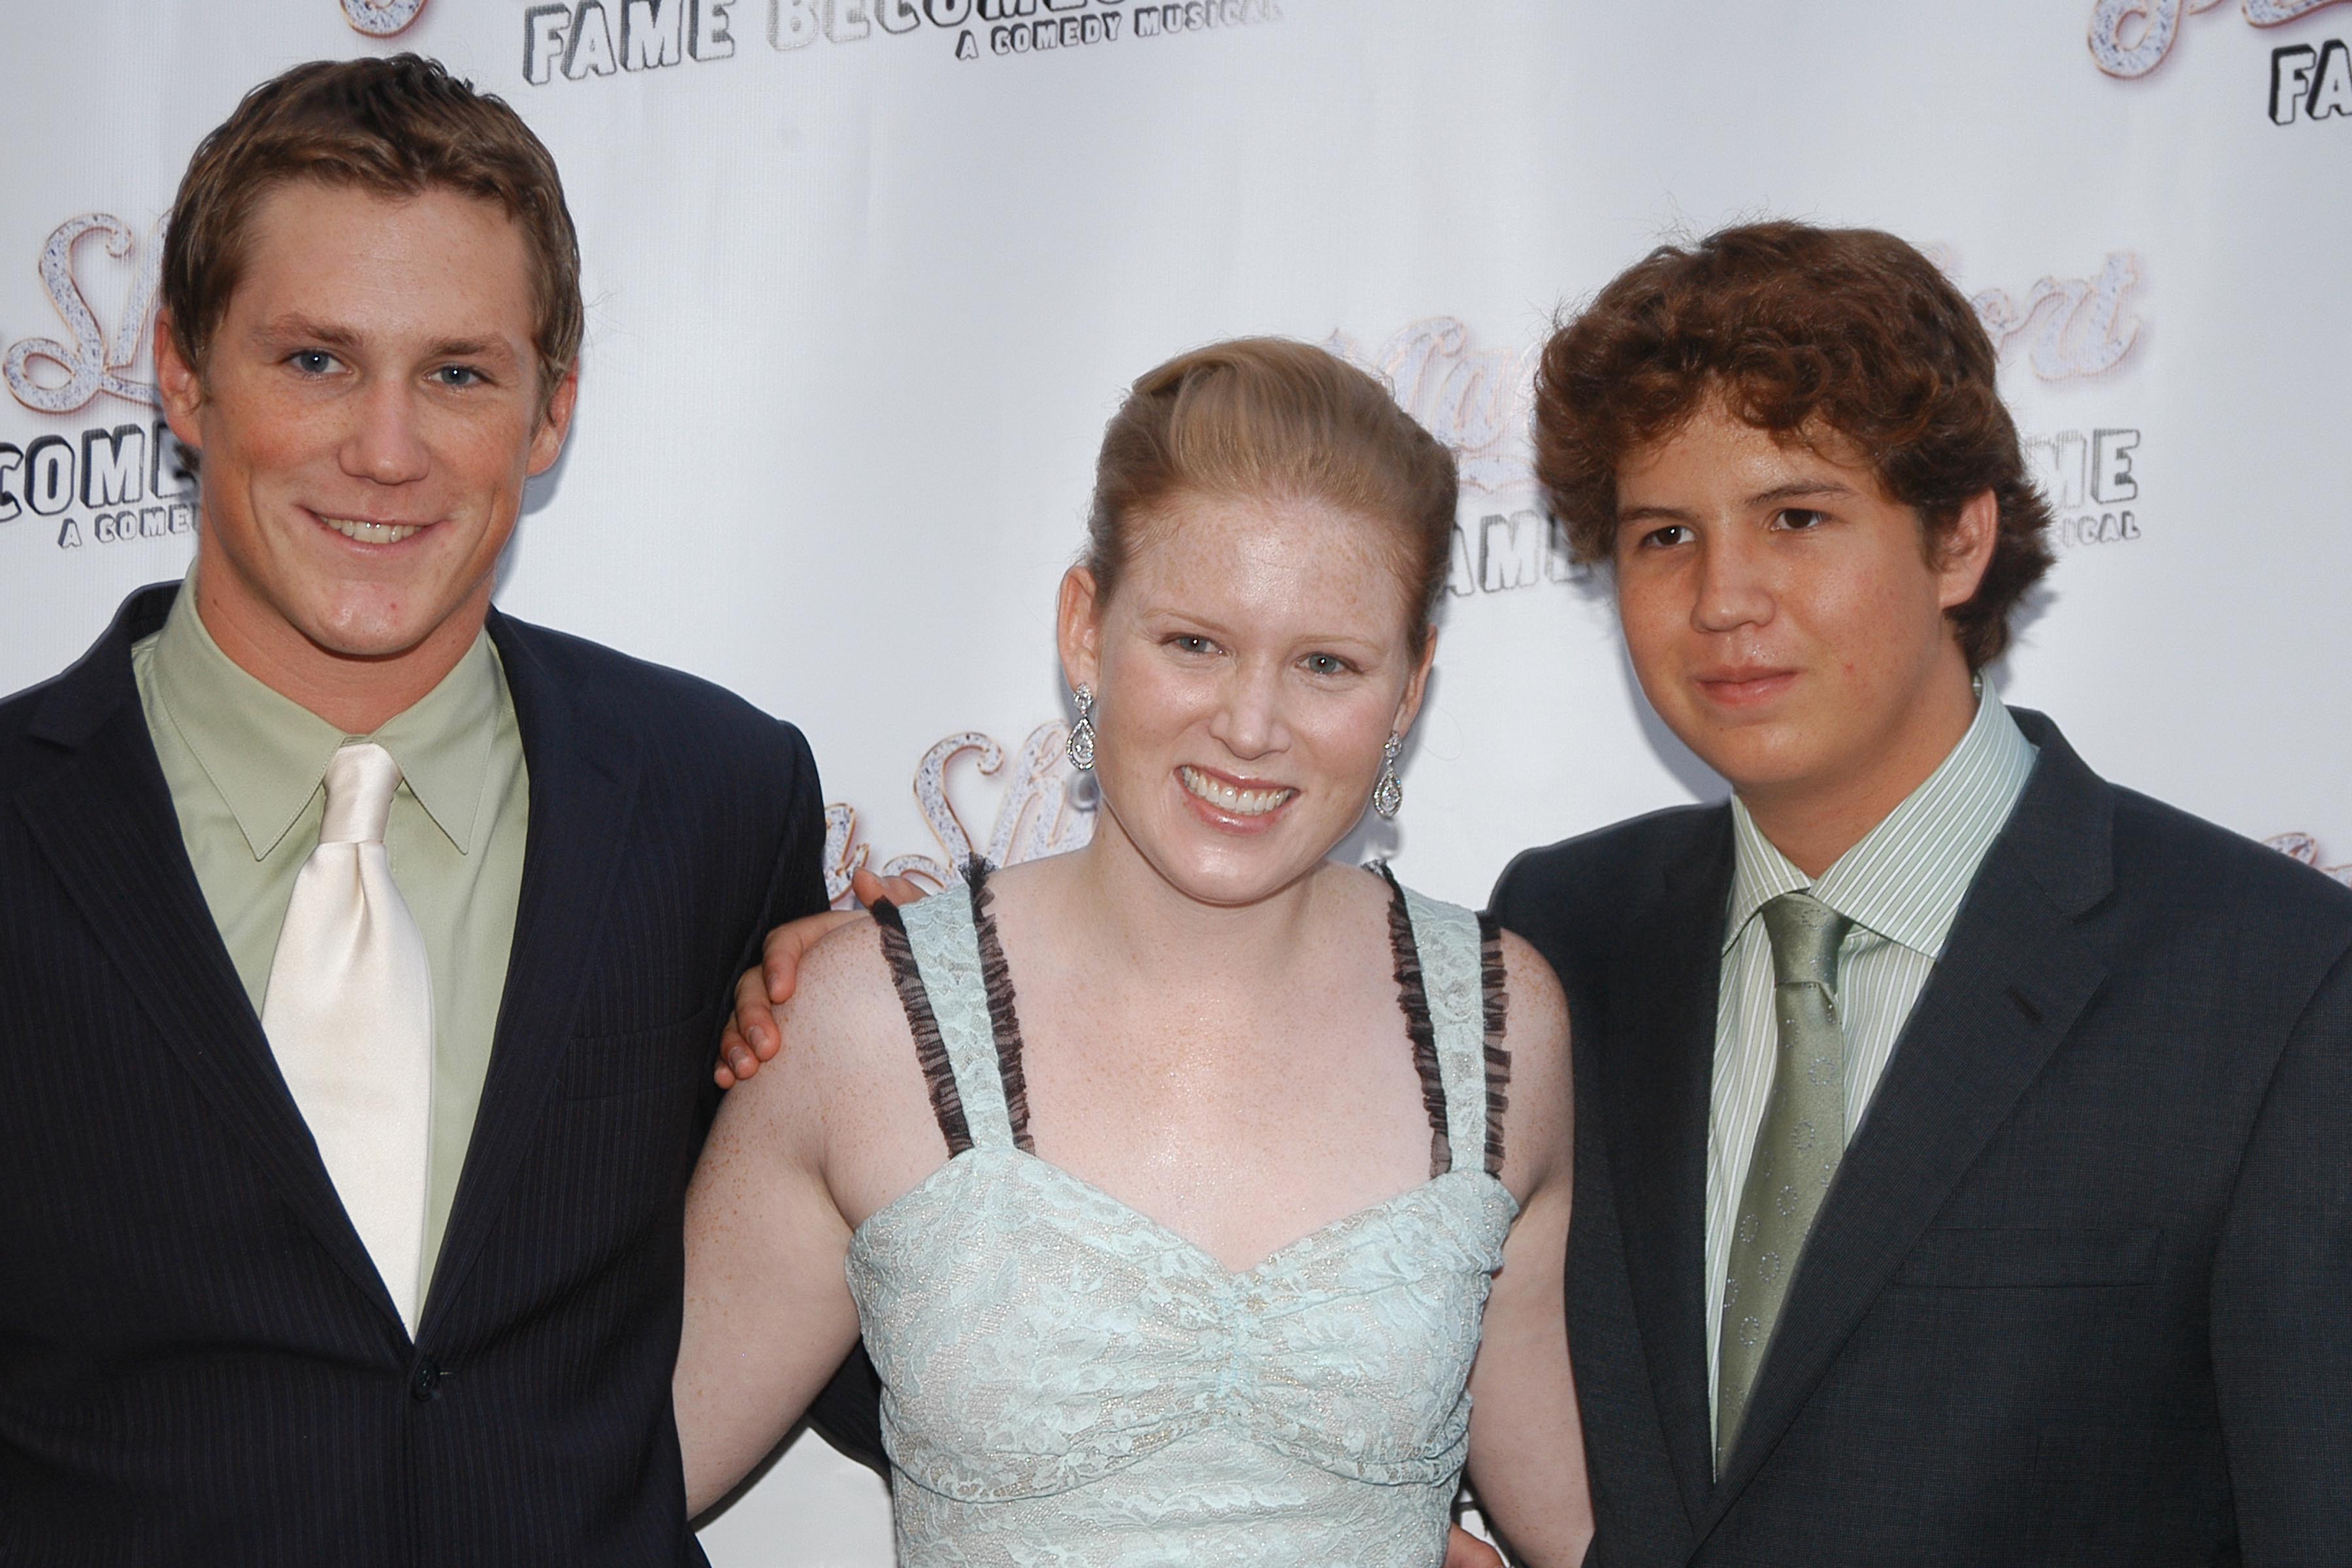 Oliver Patrick Short, Katherine Short, and Henry Short attend "Martin Short: Fame Becomes Me" Opening Night Arrivals at Bernard B. Jacobs Theatre on August 17, 2006, in New York City. | Source: Getty Images